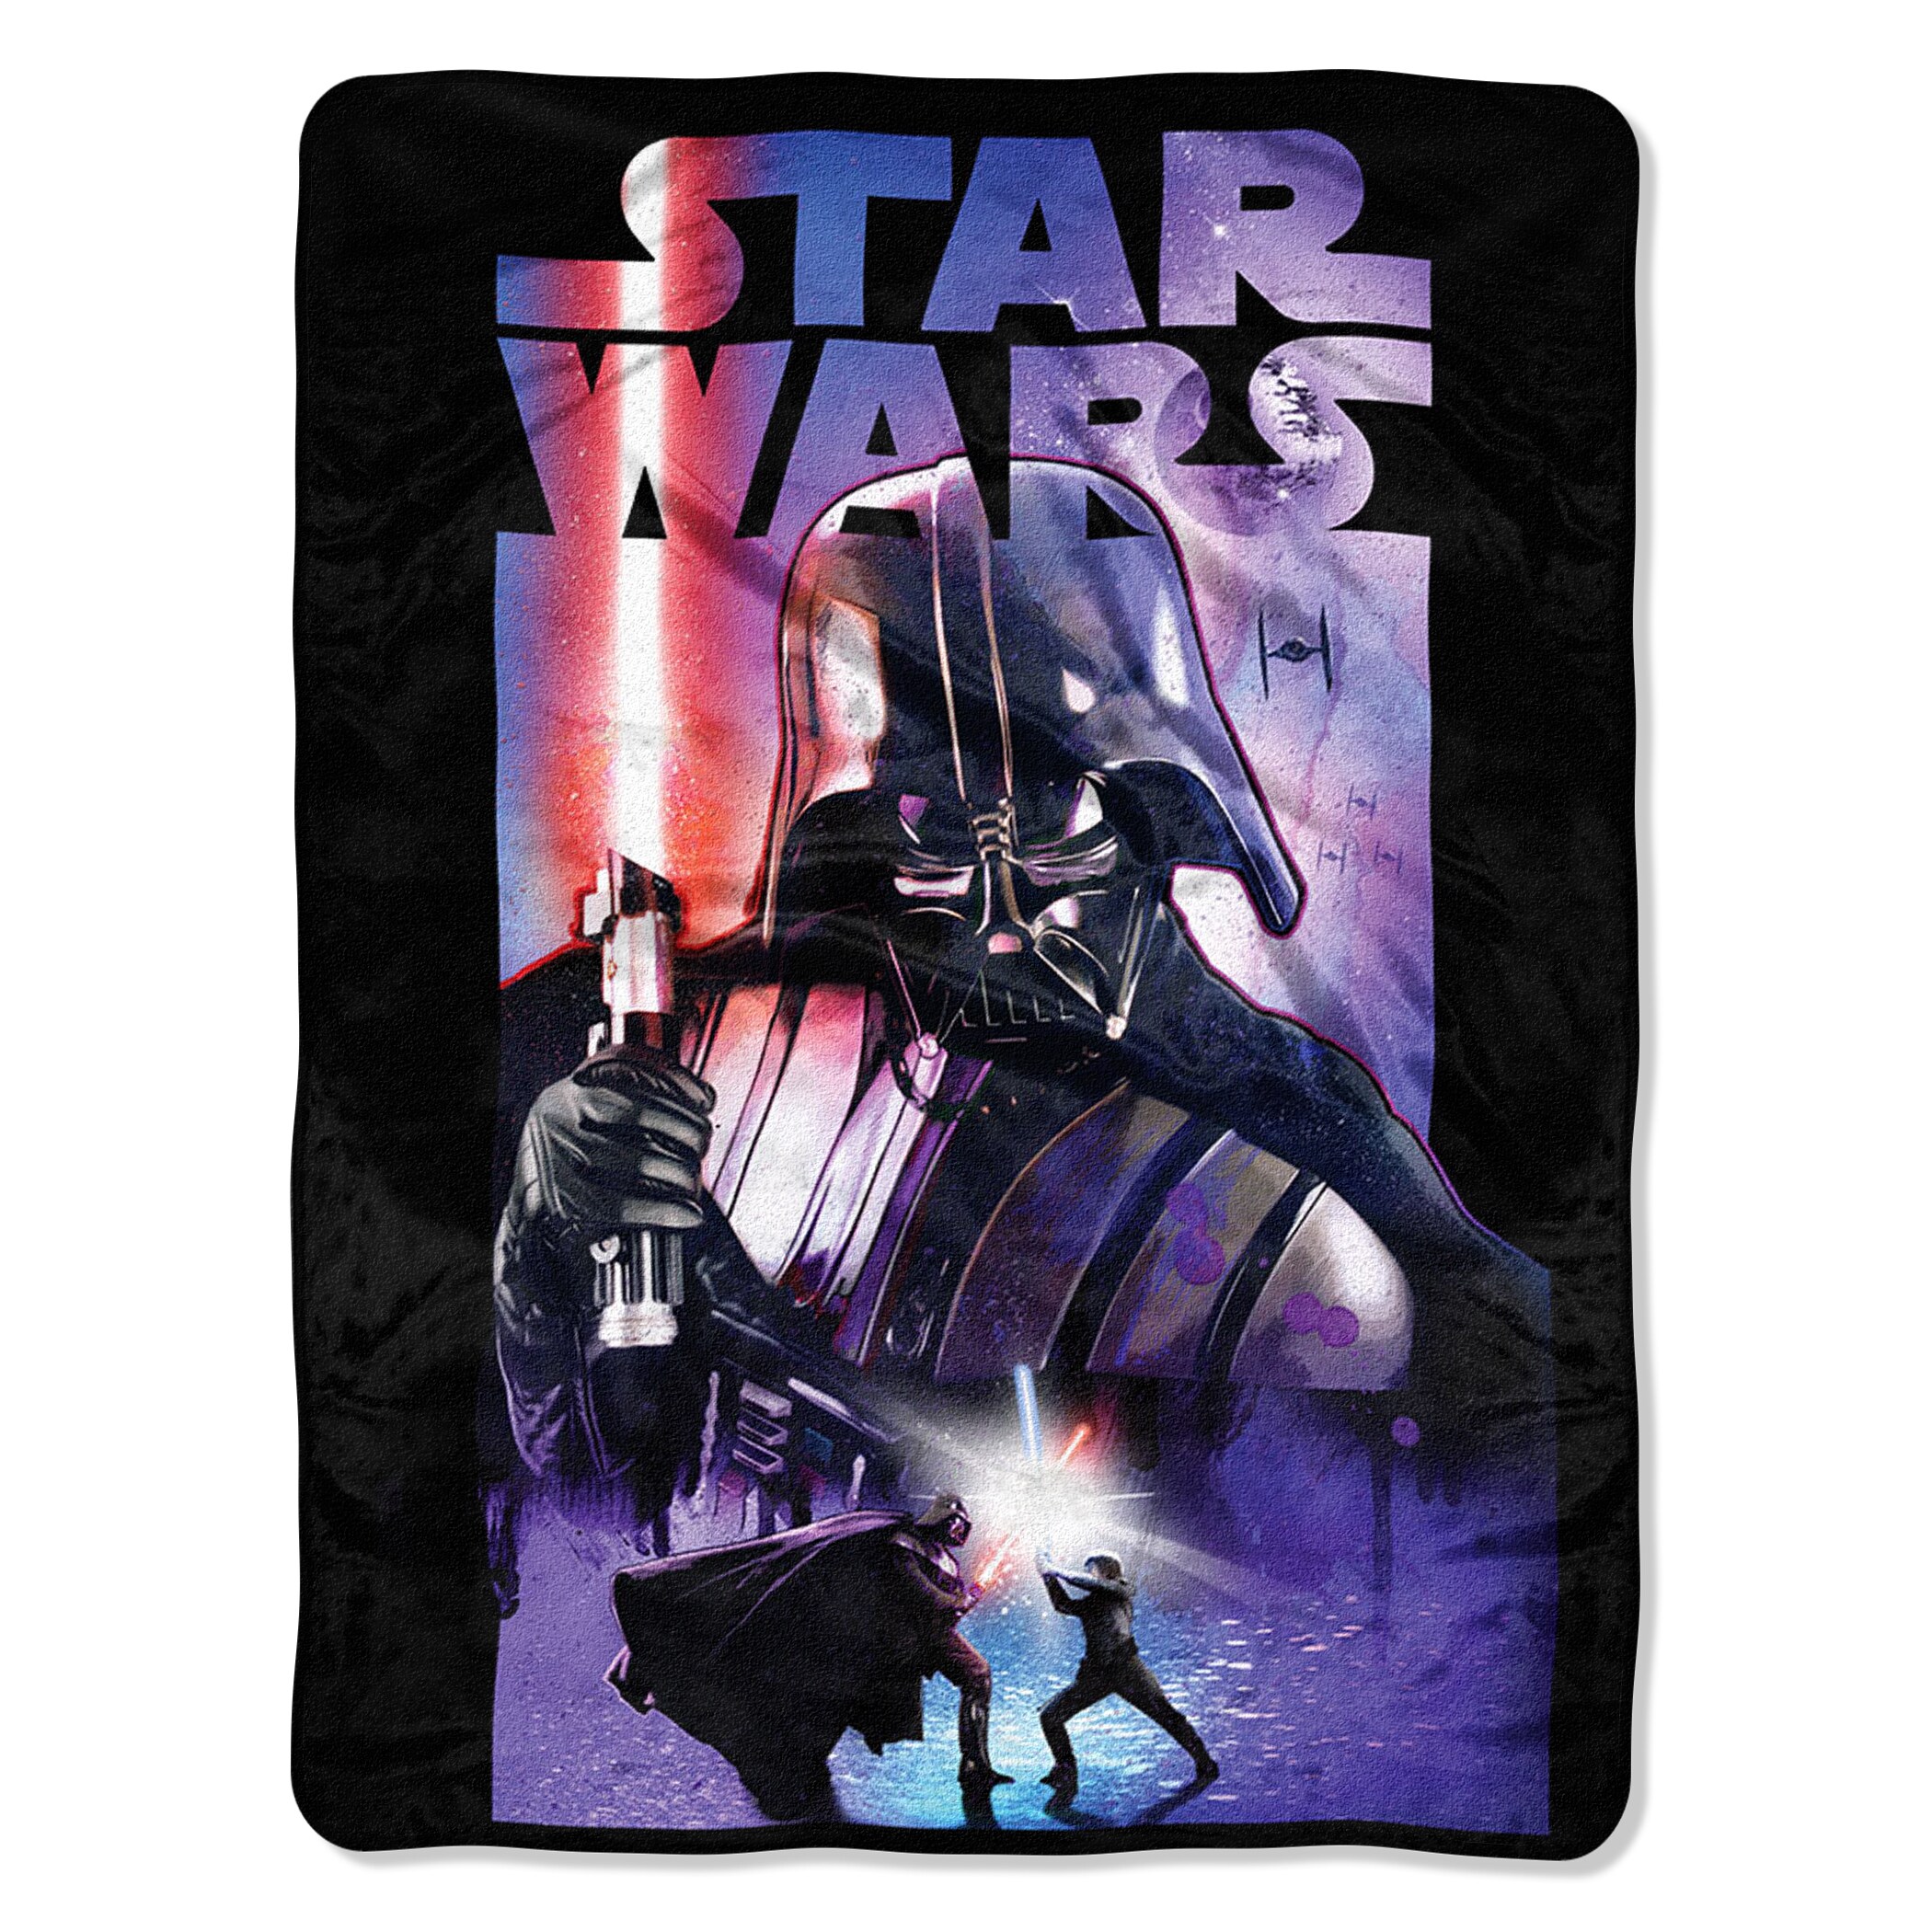 Star Wars Weighted Blanket: Get a Restful Night's Sleep with the Force -  Mosaic Weighted Blankets